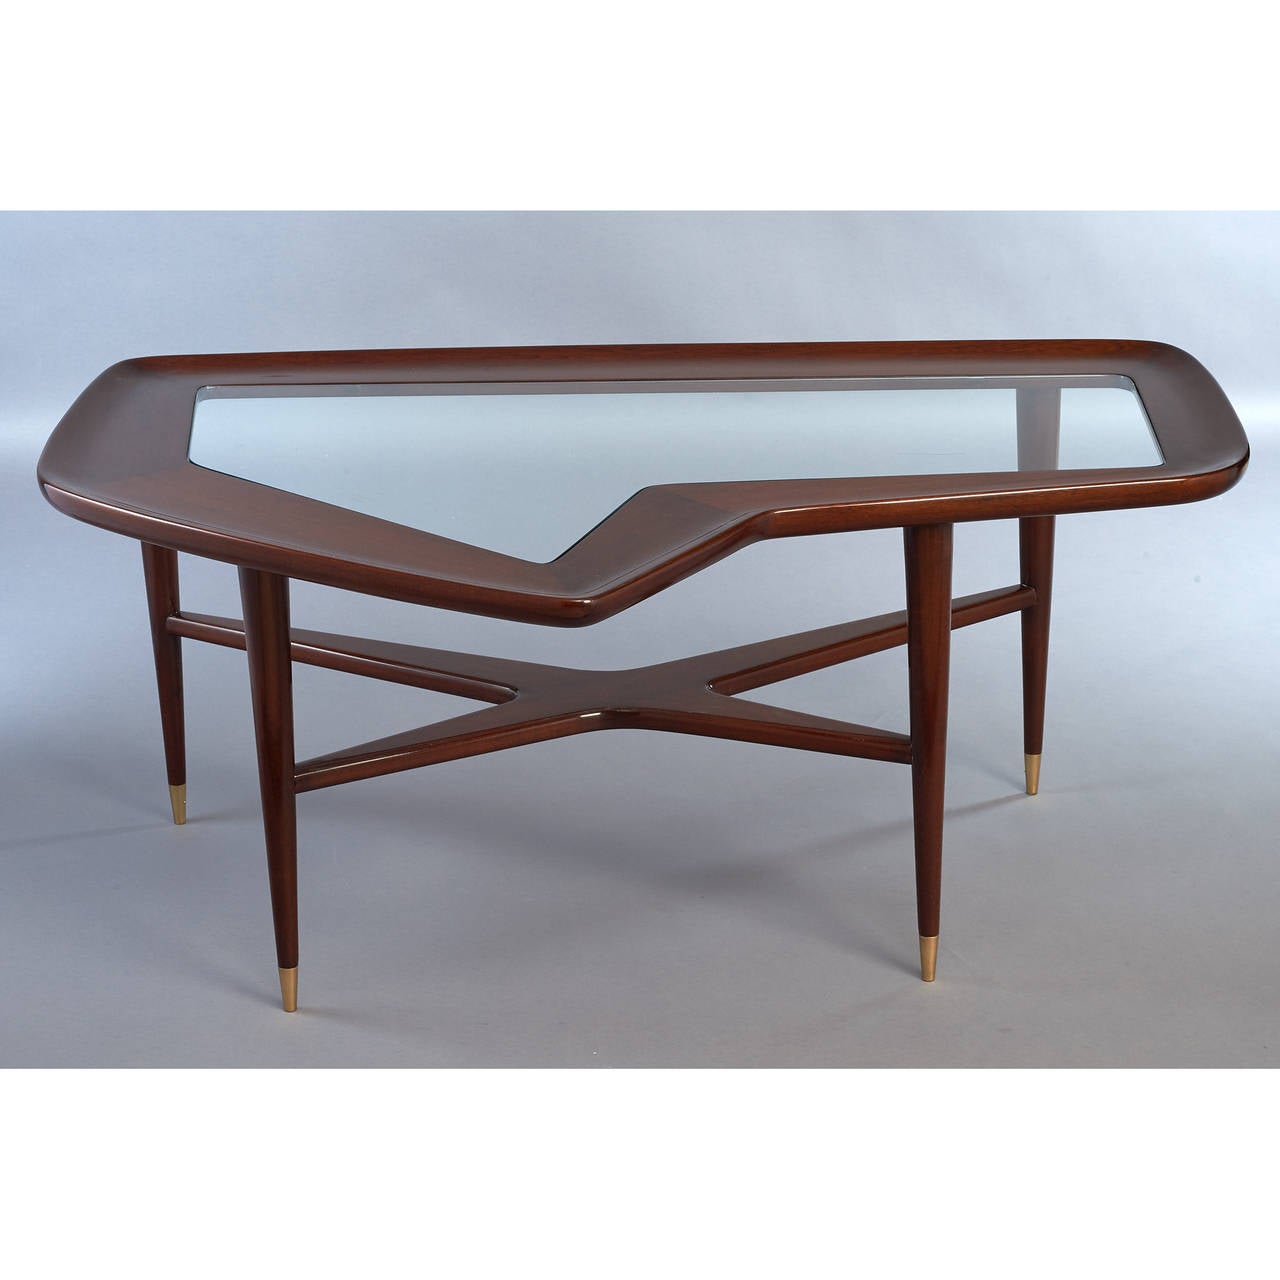 ITALY, 1950s

Sculptural free form coffee table 
Polished walnut with inset glass top 
Brass sabots

47 x 36 x 20 H